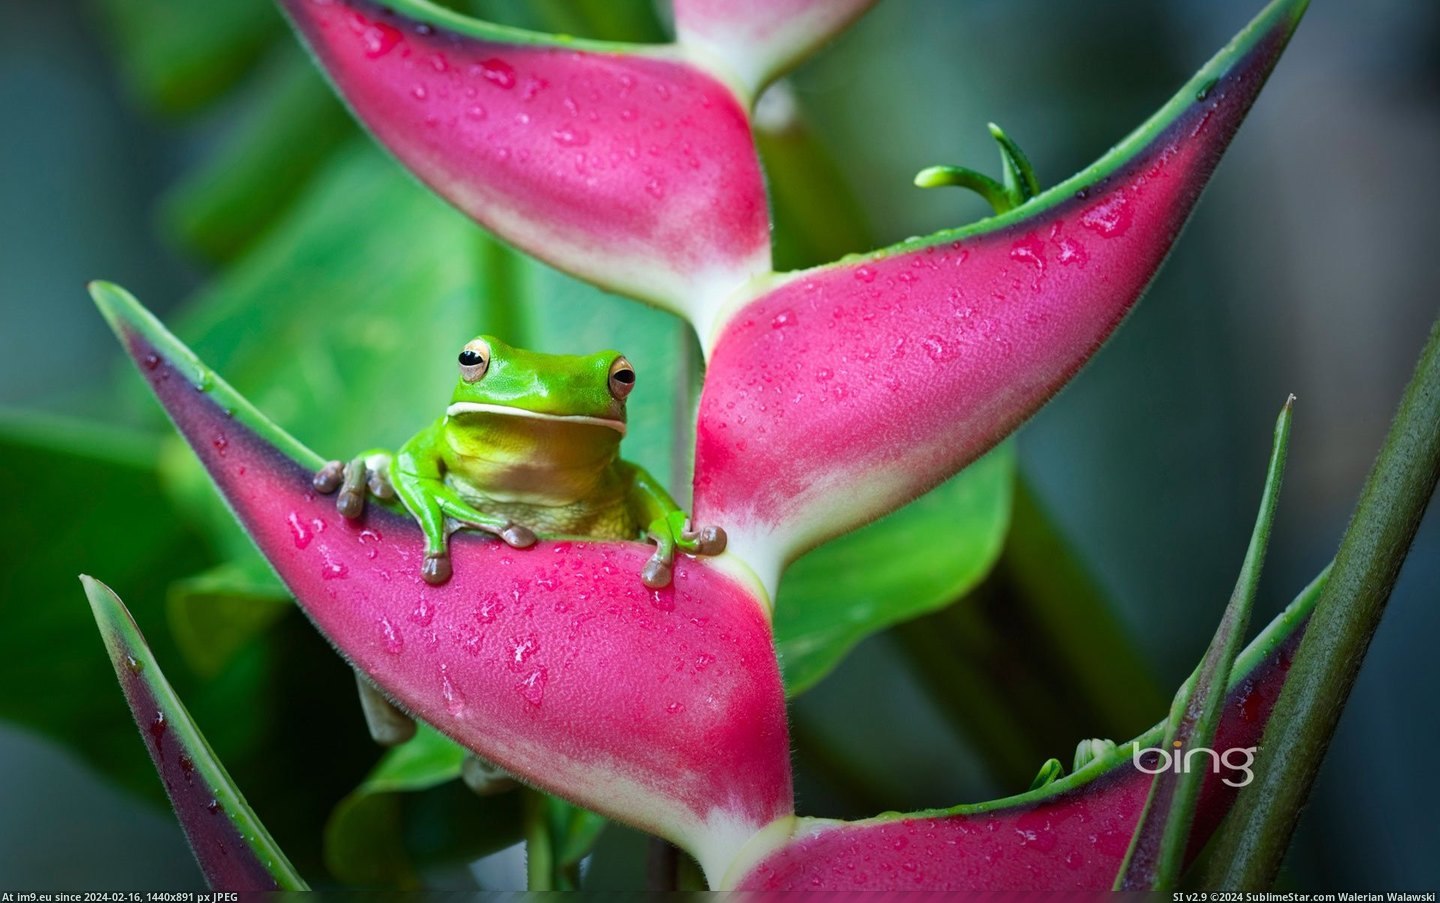 White-lipped tree frog (Litoria infrafrenata) on a heliconia flower in Cairns, Queensland, Australia (© Getty Images) (in Best photos of February 2013)